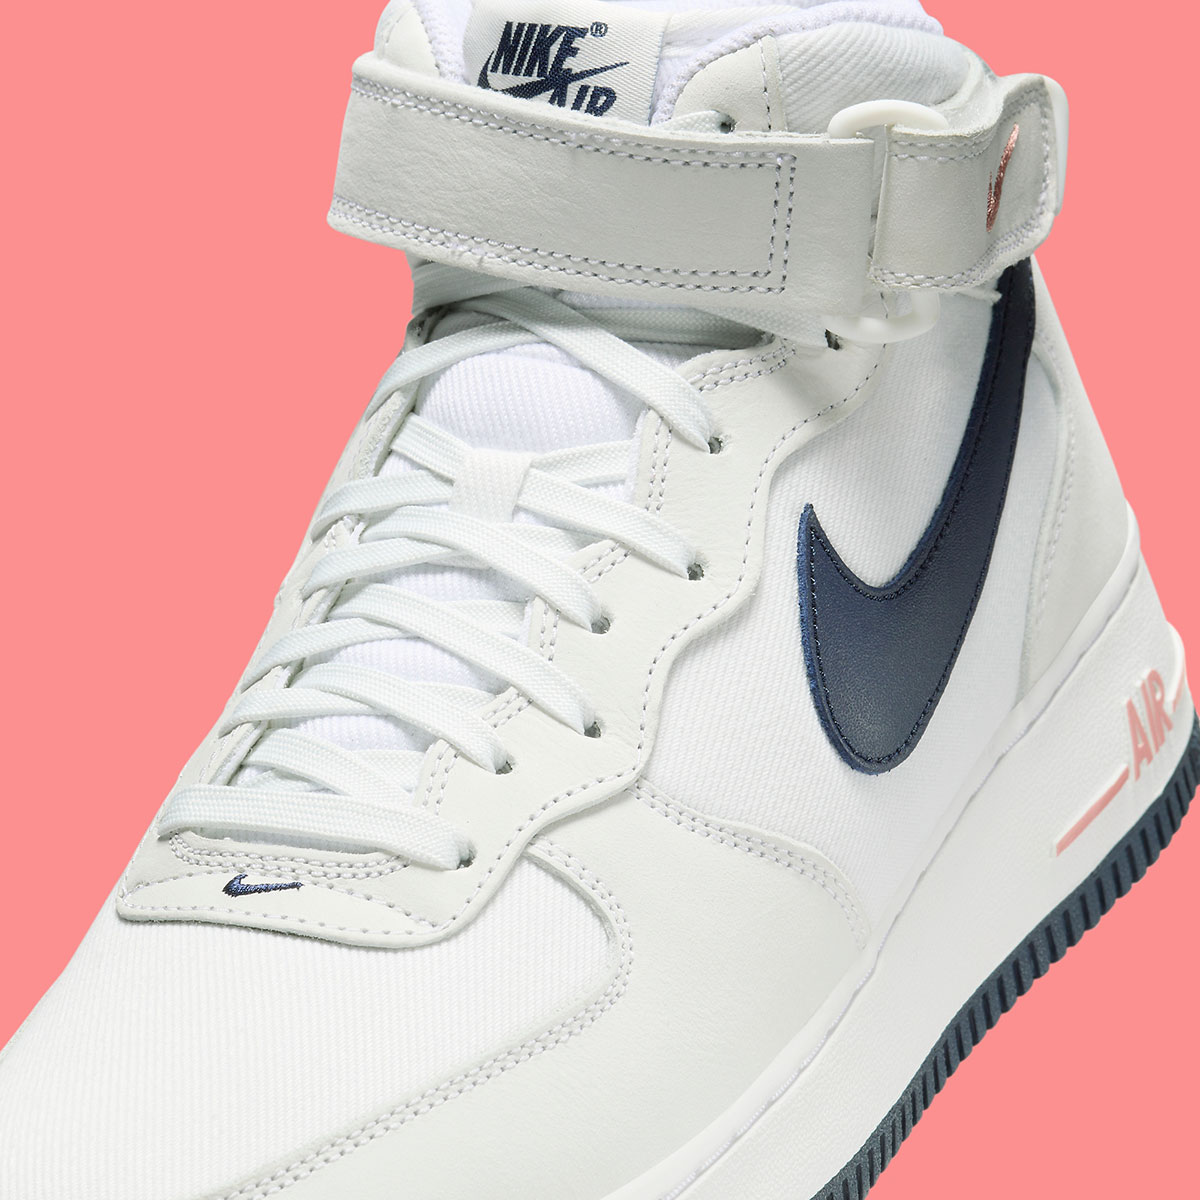 Une collection sacai x Nike New Cortez en approche Mid Summit White Obsidian Pink Fb8879 100 9